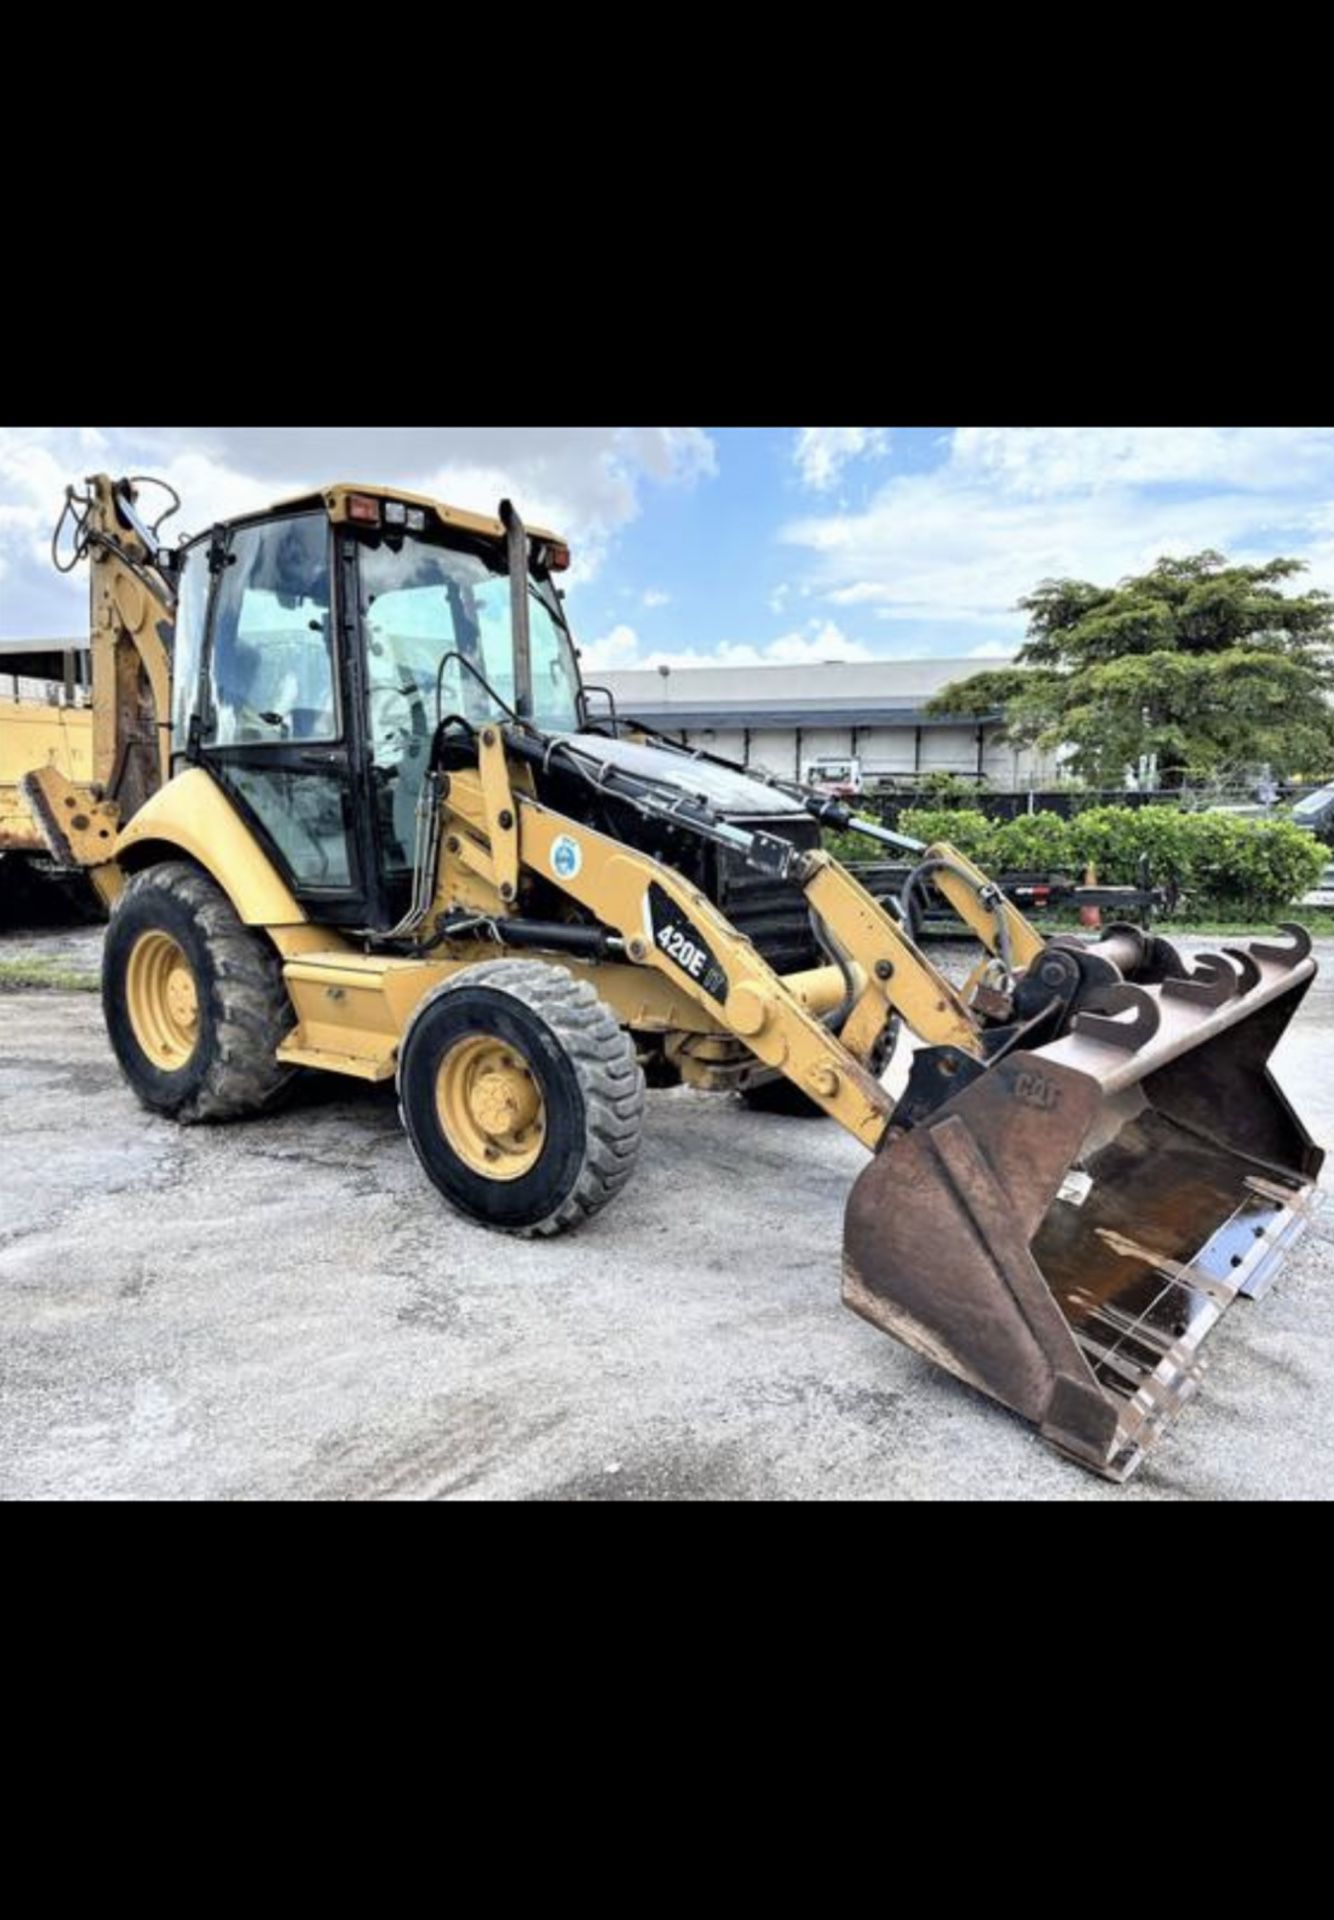 BACKHOE LOADER TRACTOR 4X4 CATERPILLAR 420E 2008 WITH AC